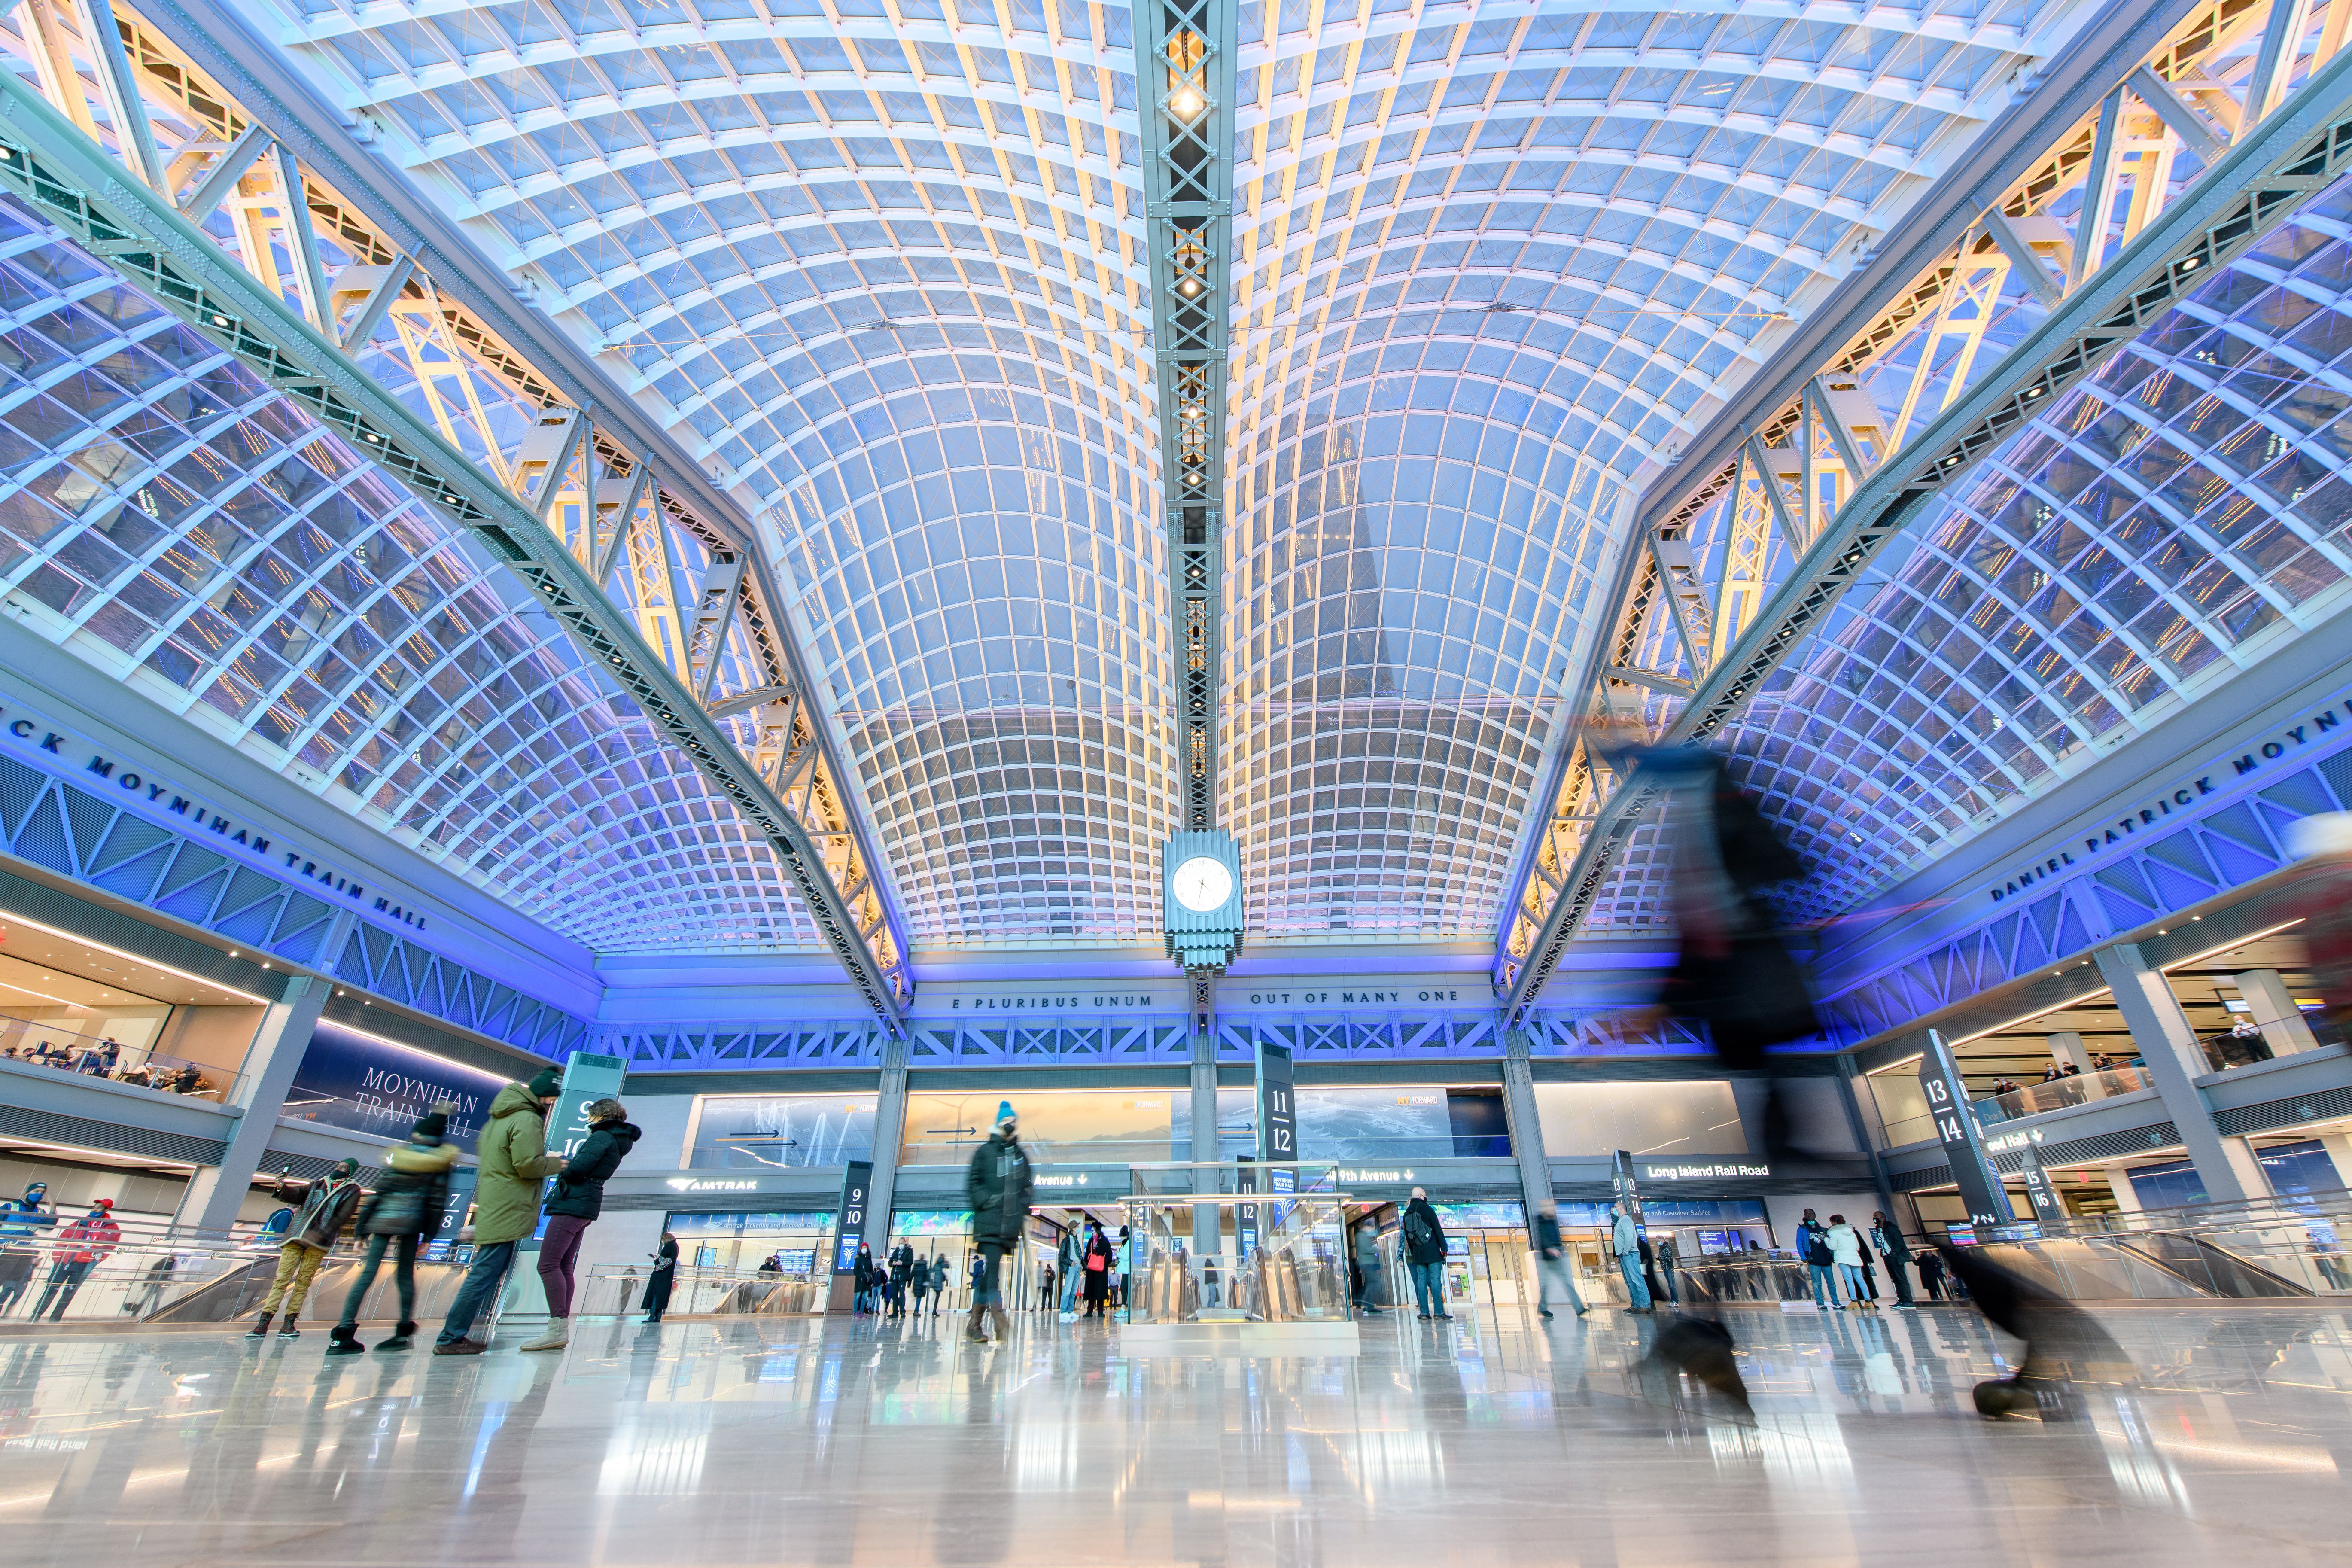 Picture of the inside of the station showing the glass ceiling and people walking around